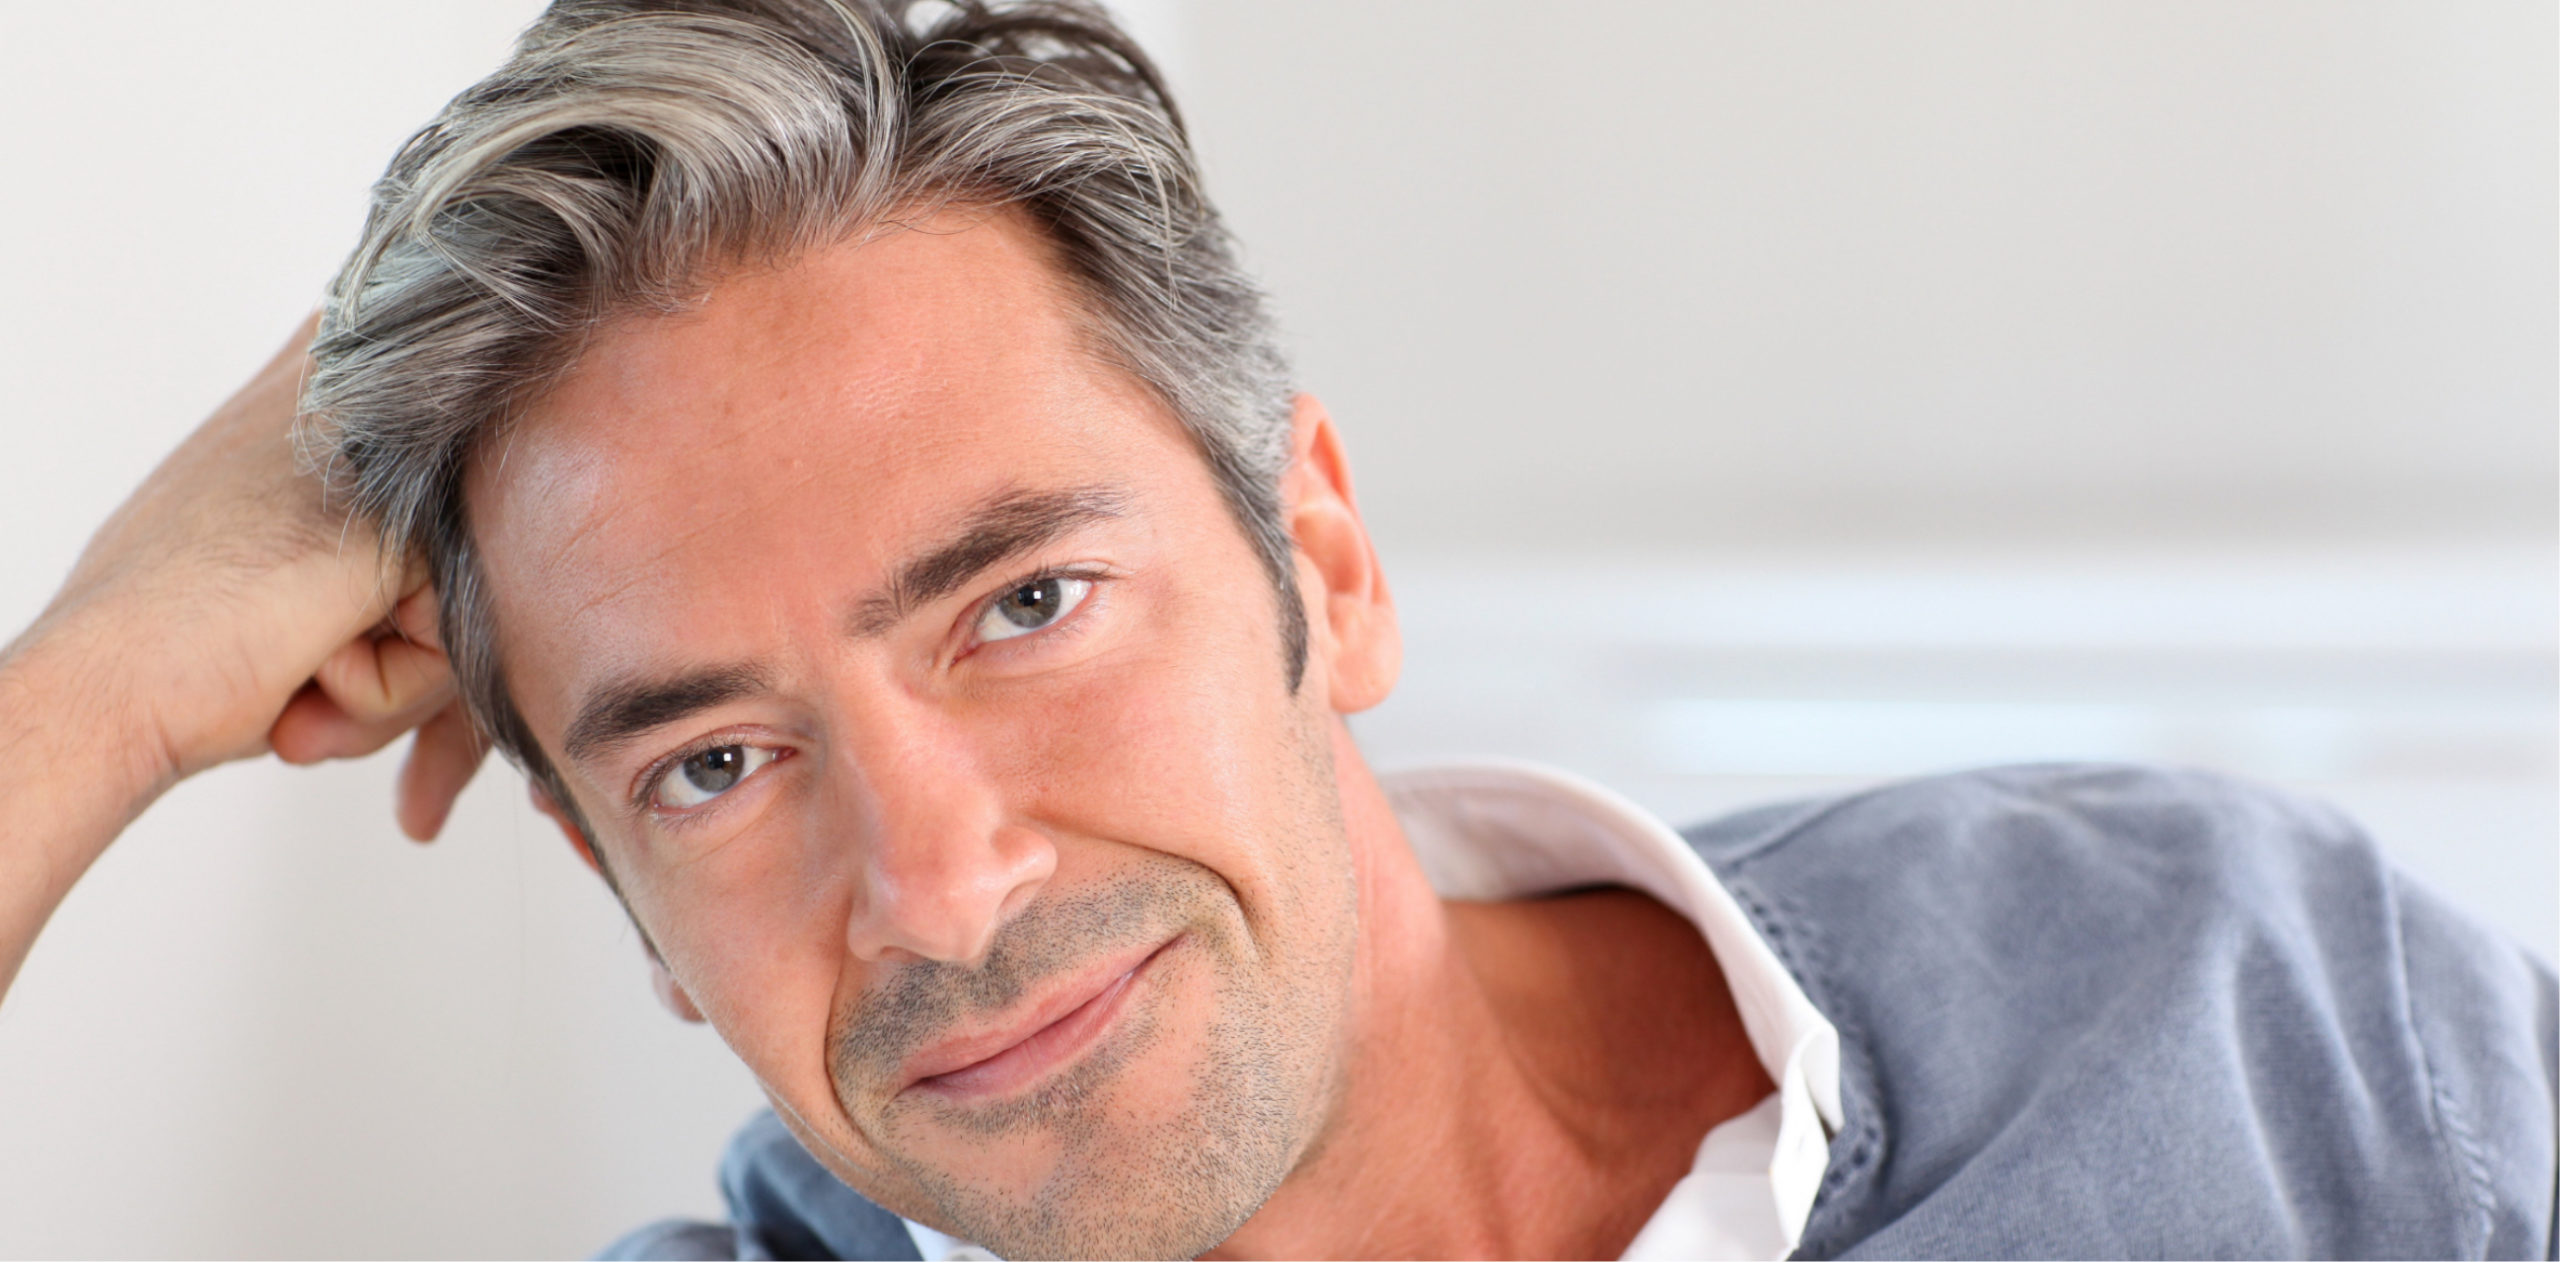 Aesthetic Treatments for Men: Hair Loss Treatments and Dermal Fillers